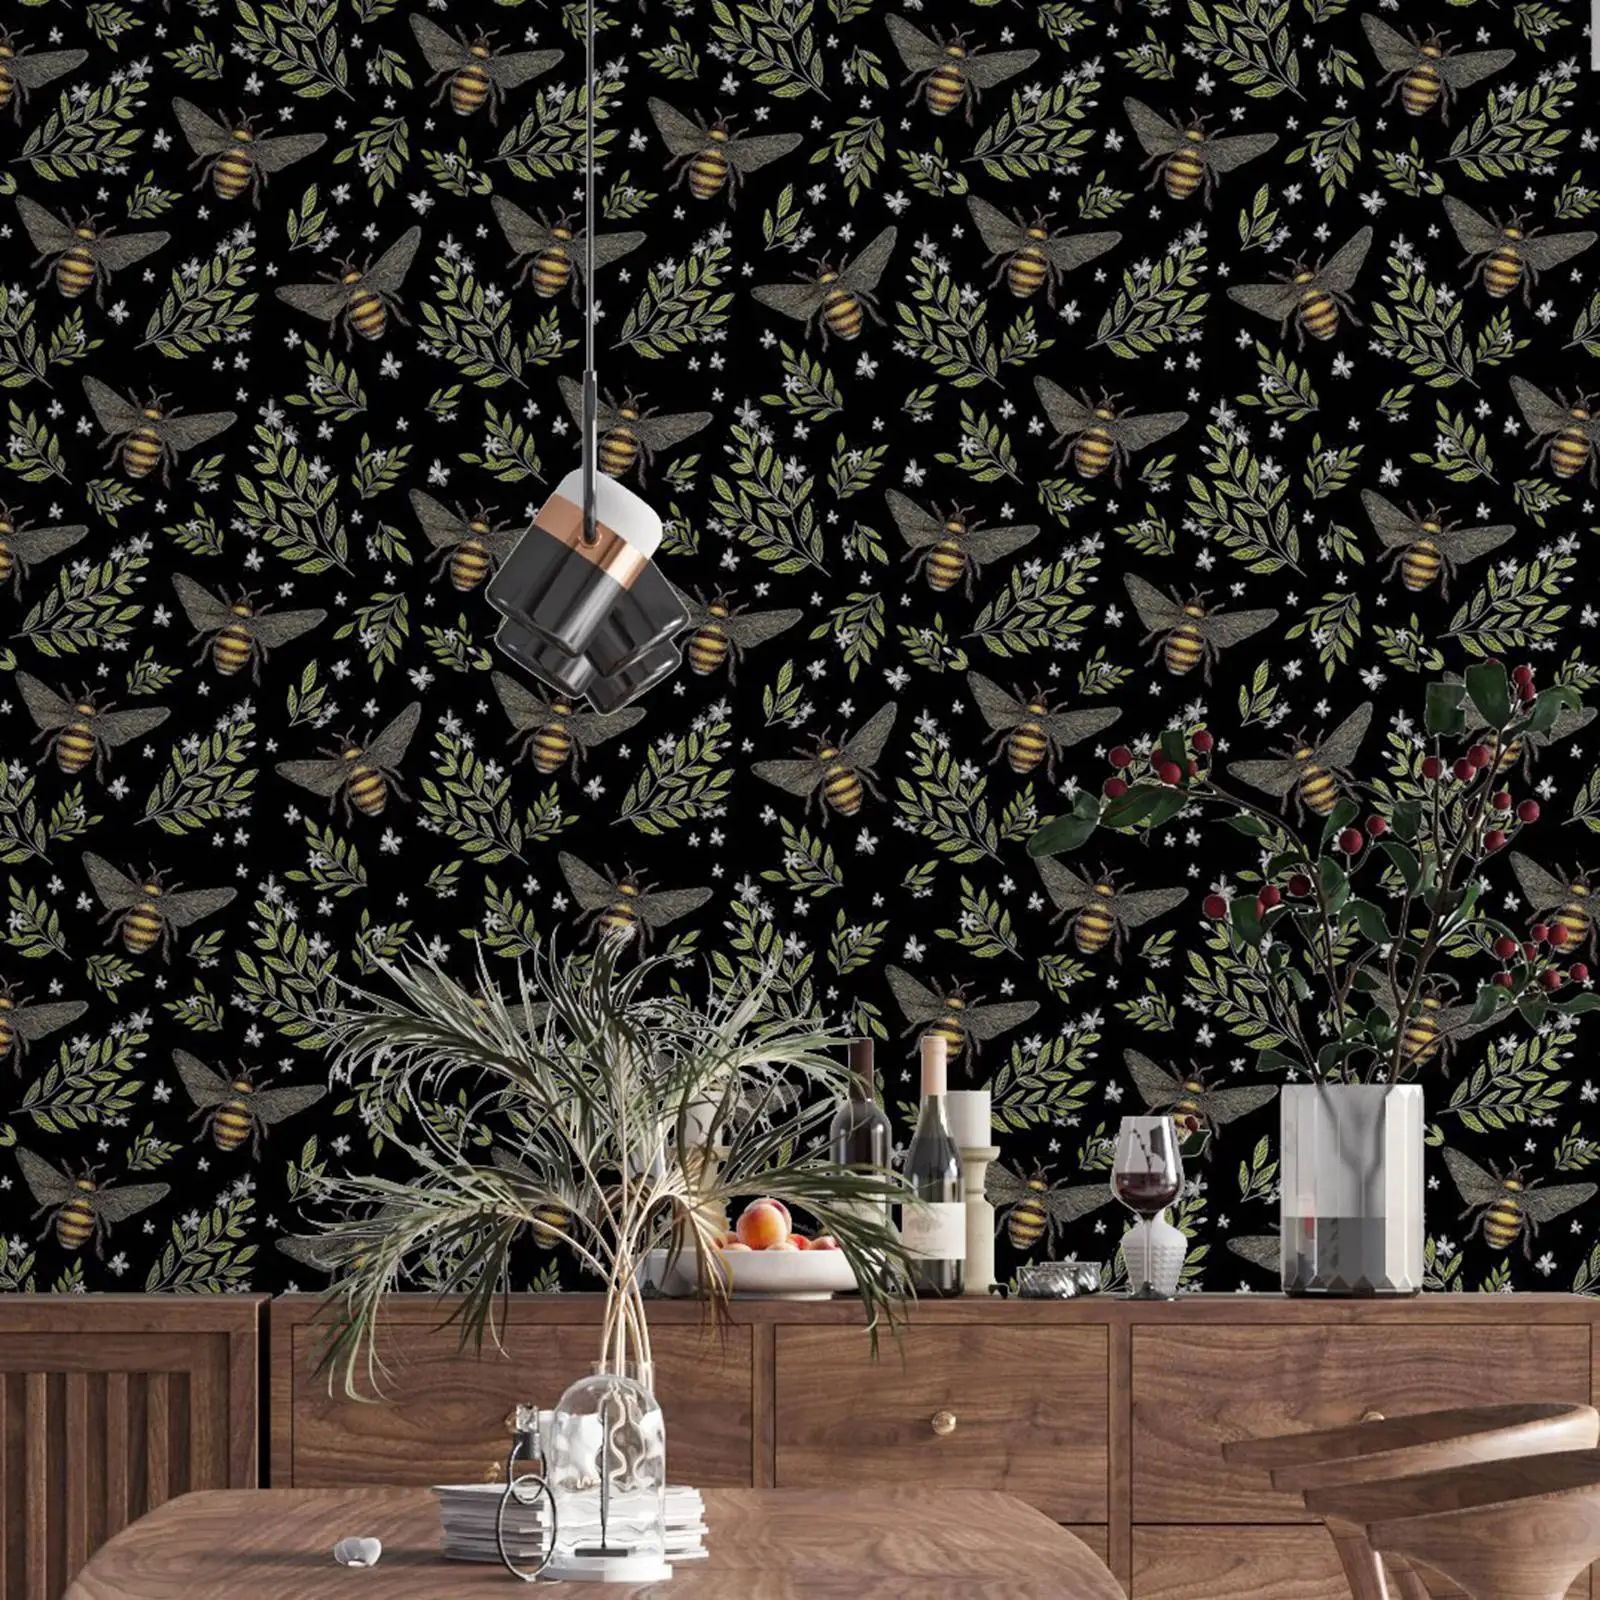 Spring Bee Removable Wallpaper in Midnight Black, Honey Bee Wall Paper in black back ground for living room bedroom HB0624001 ноутбук asus tp3604va mc102 flip 16 touch intel core i3 1315u 1 2ghz 8gb 512gb int intel uhd graphics dos midnight black 90nb1051 m003m0